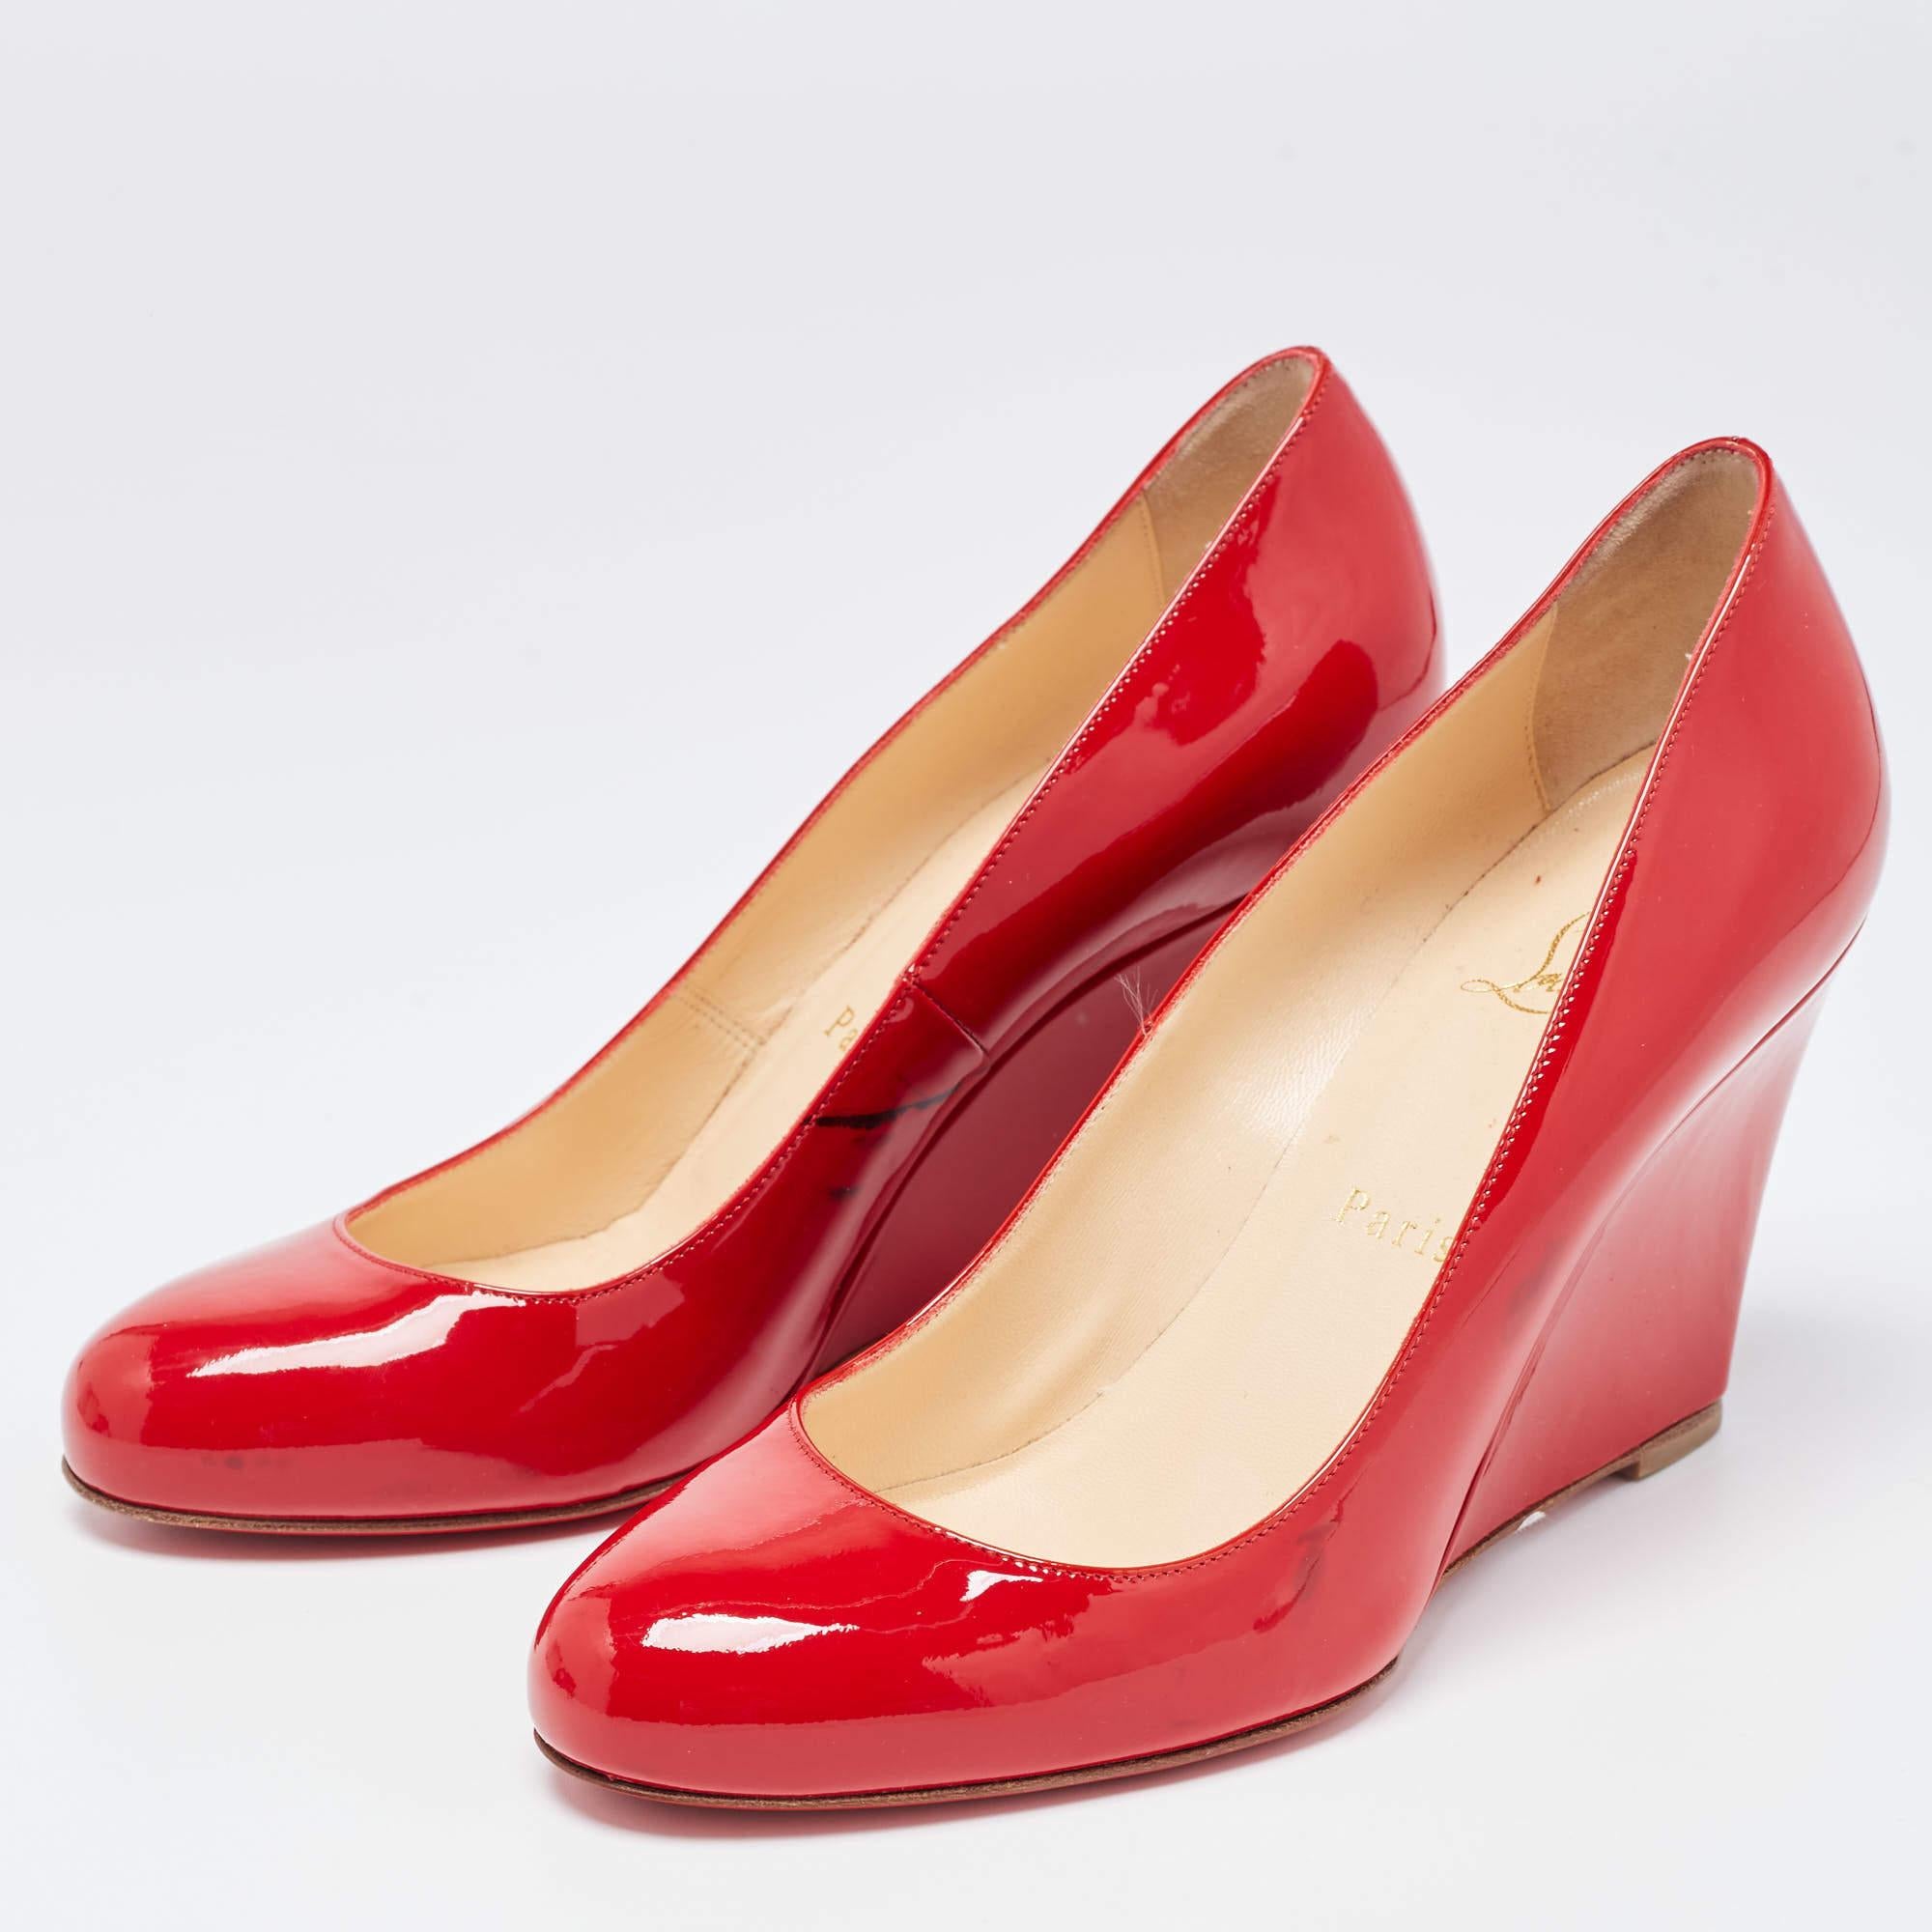 Women's Christian Louboutin Red Patent Leather Ron Ron Wedge Pumps Size 38.5 For Sale